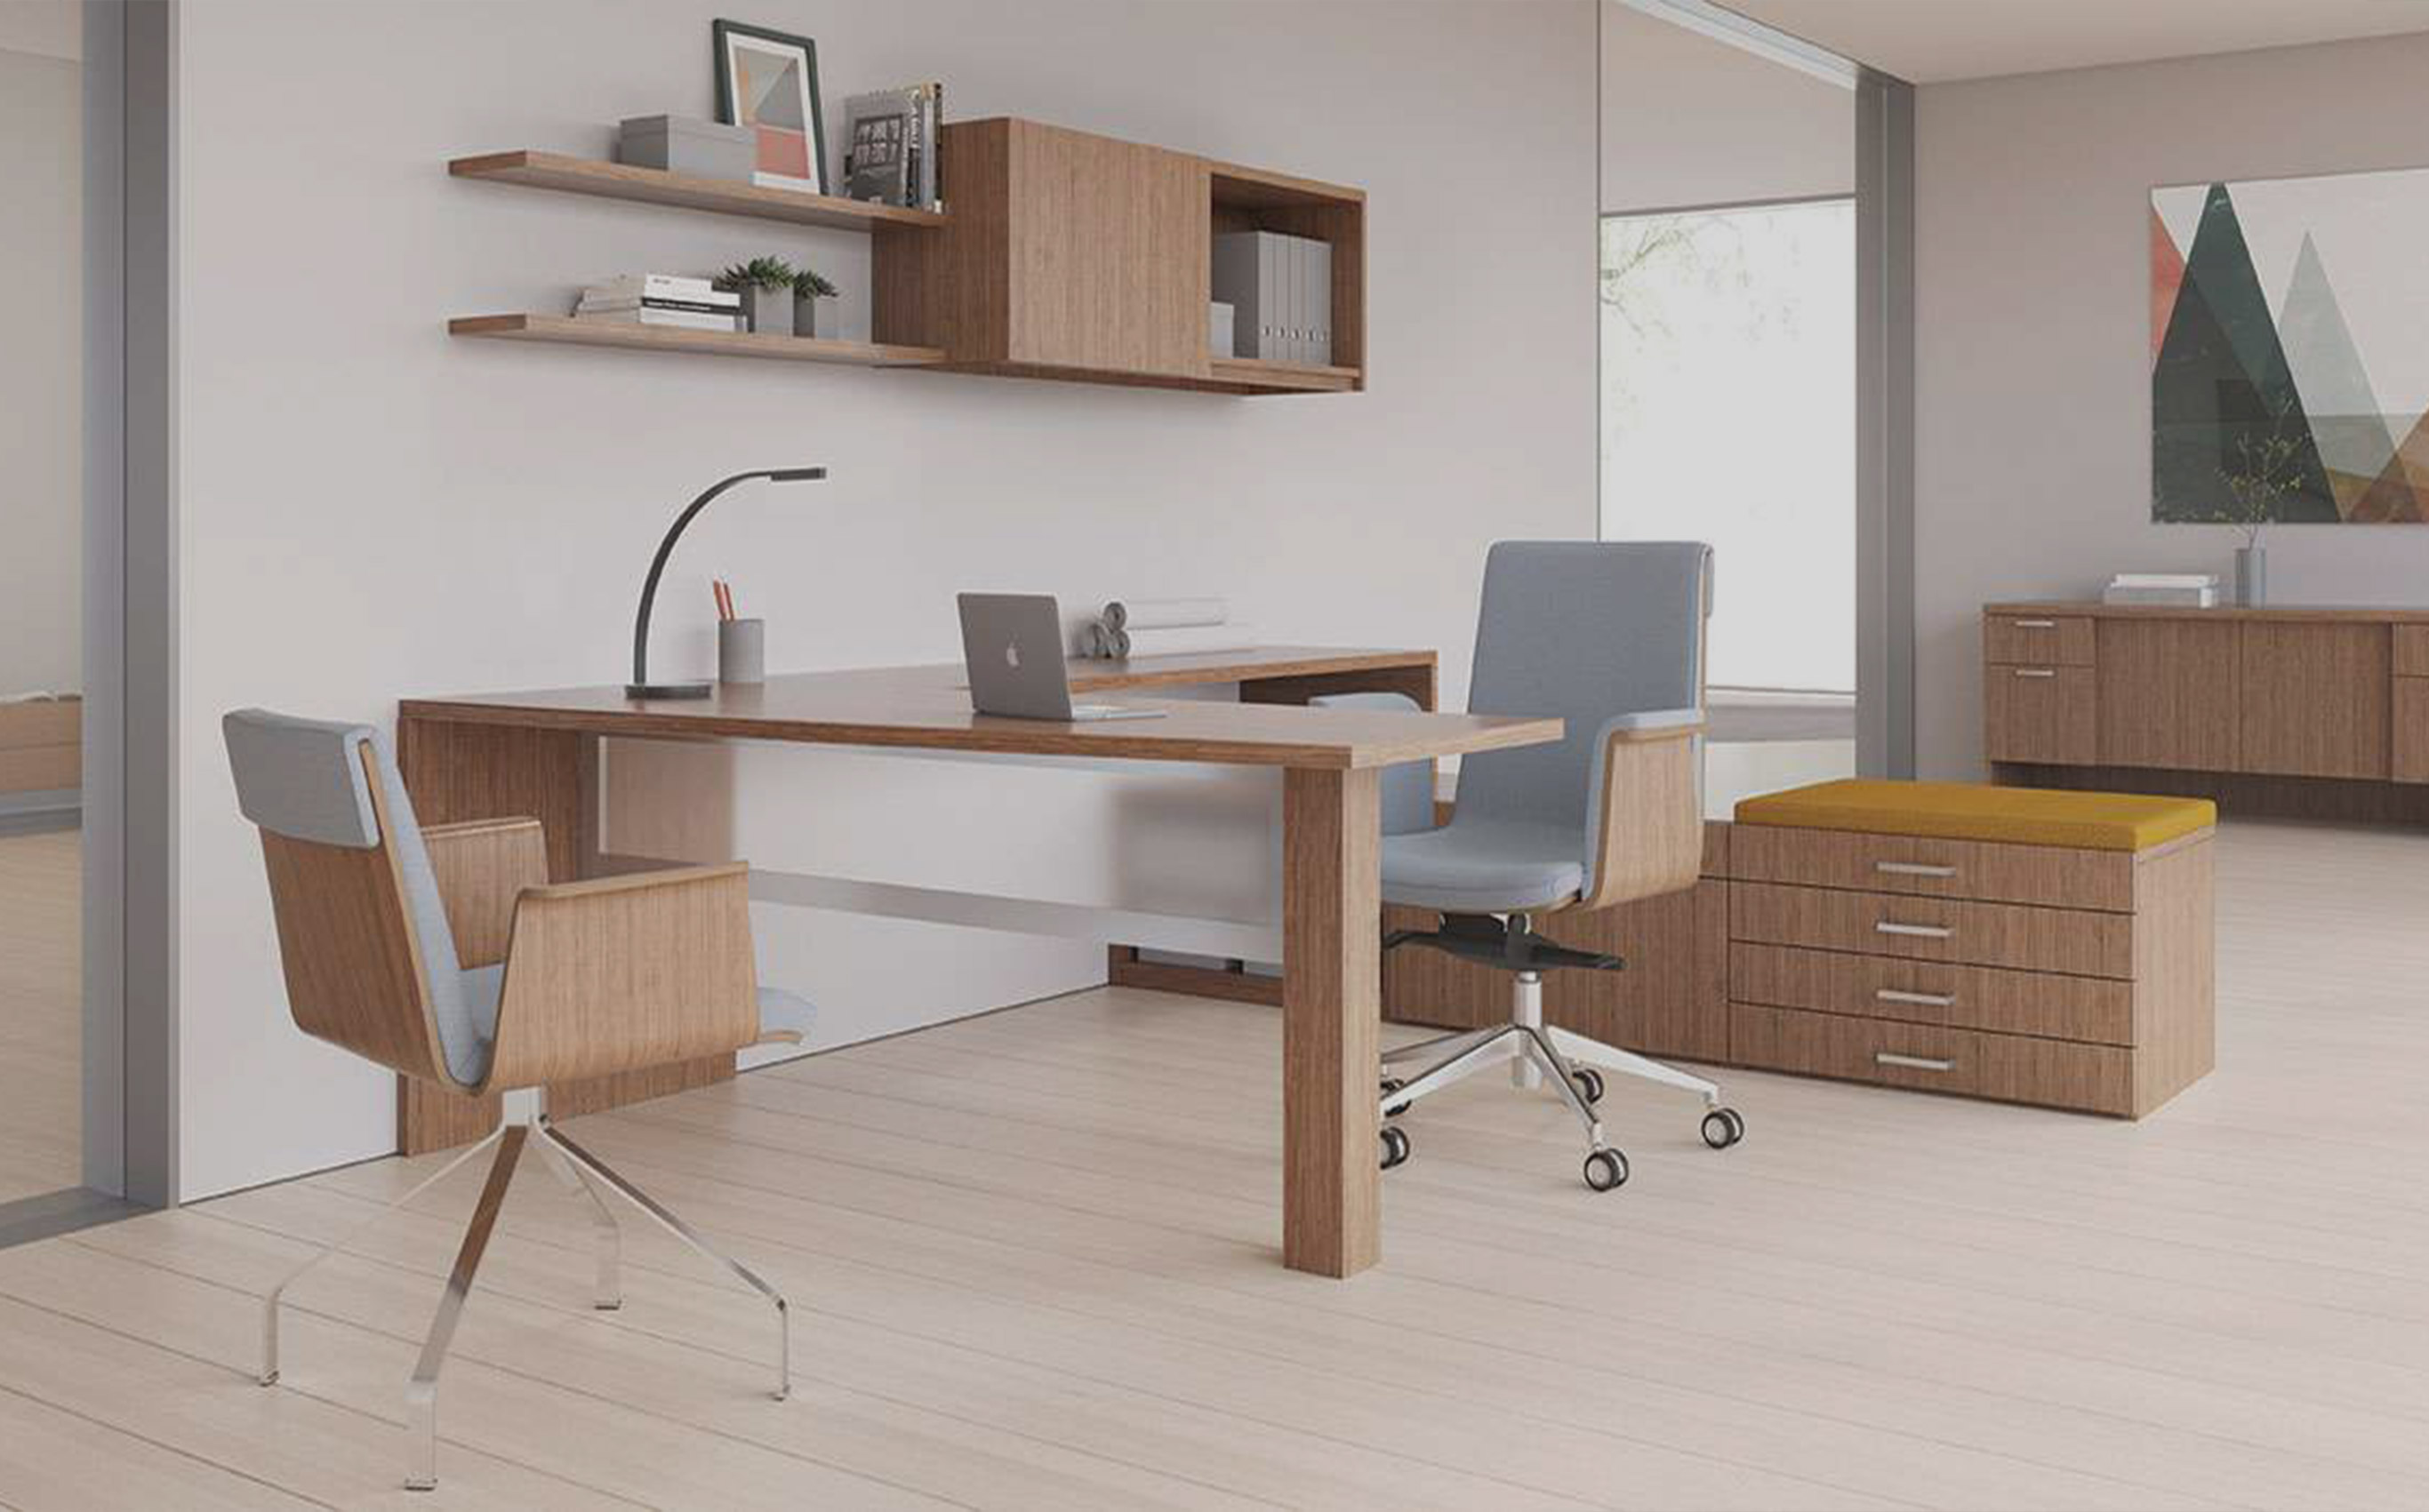 Wholesale Contract Furniture: Getting The Best Deals For Your Business Needs